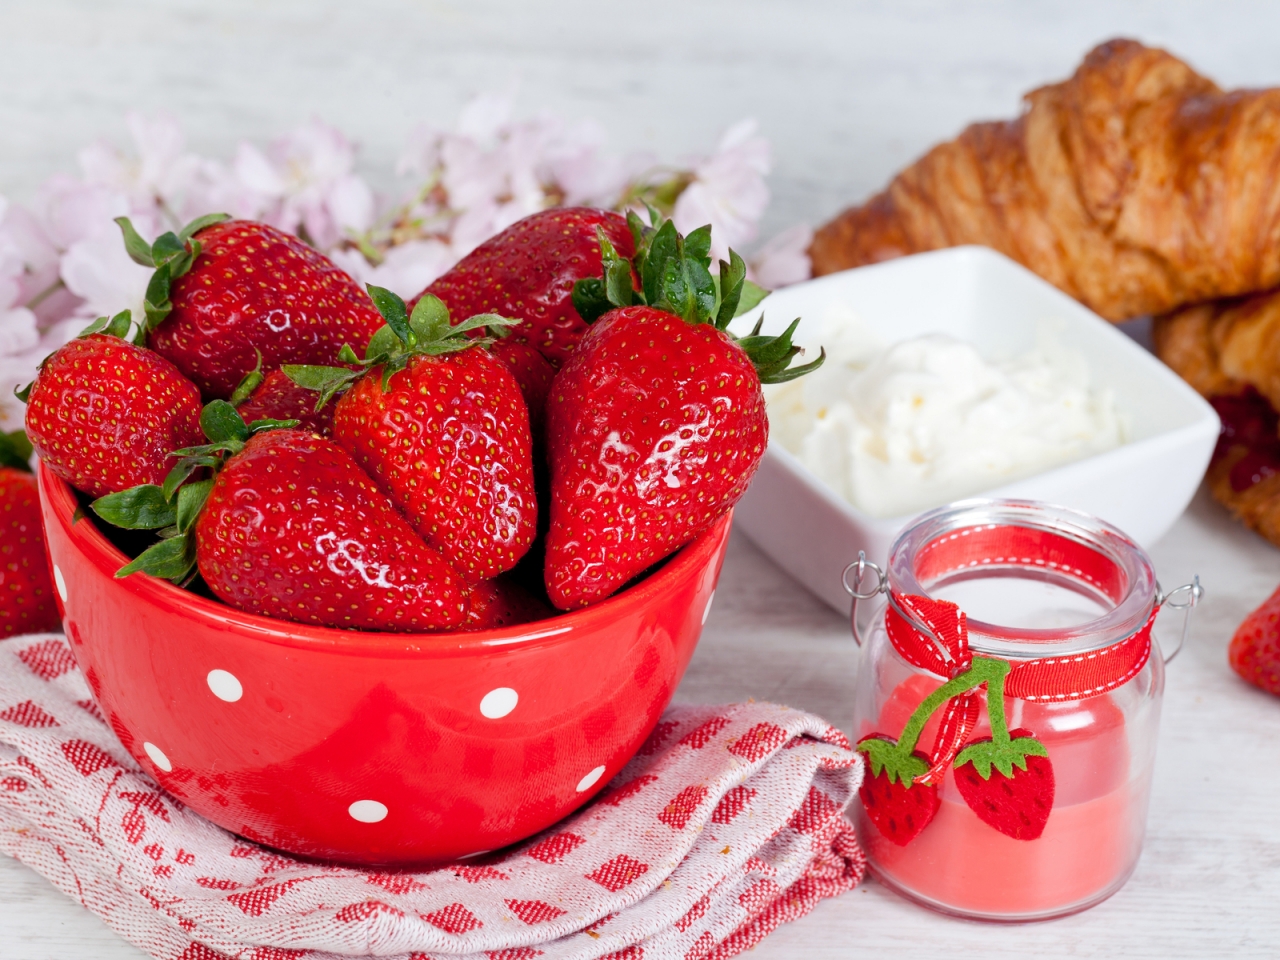 Strawberries and Sour Cream for 1280 x 960 resolution